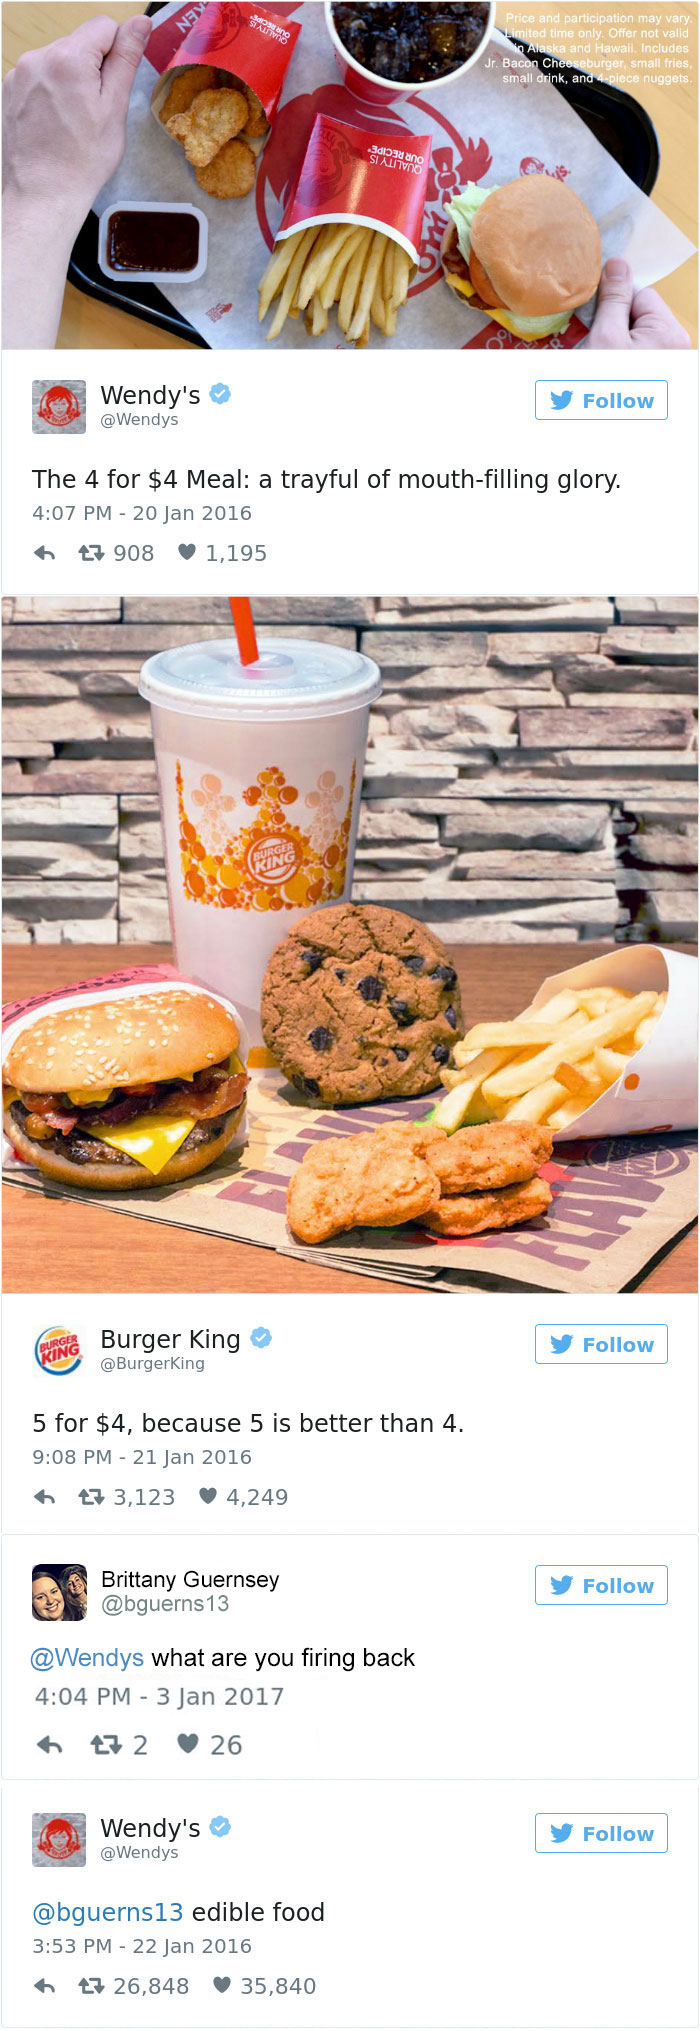 tweet - wendy's vs burger king twitter - New Price and participation may vary. Limited time only. Offer not valid Alaska and Hawaii. Includes Jr. Bacon Cheeseburger, small fries, small drink, and 4piece nuggets. Wendy's y The 4 for $4 Meal a trayful of mo